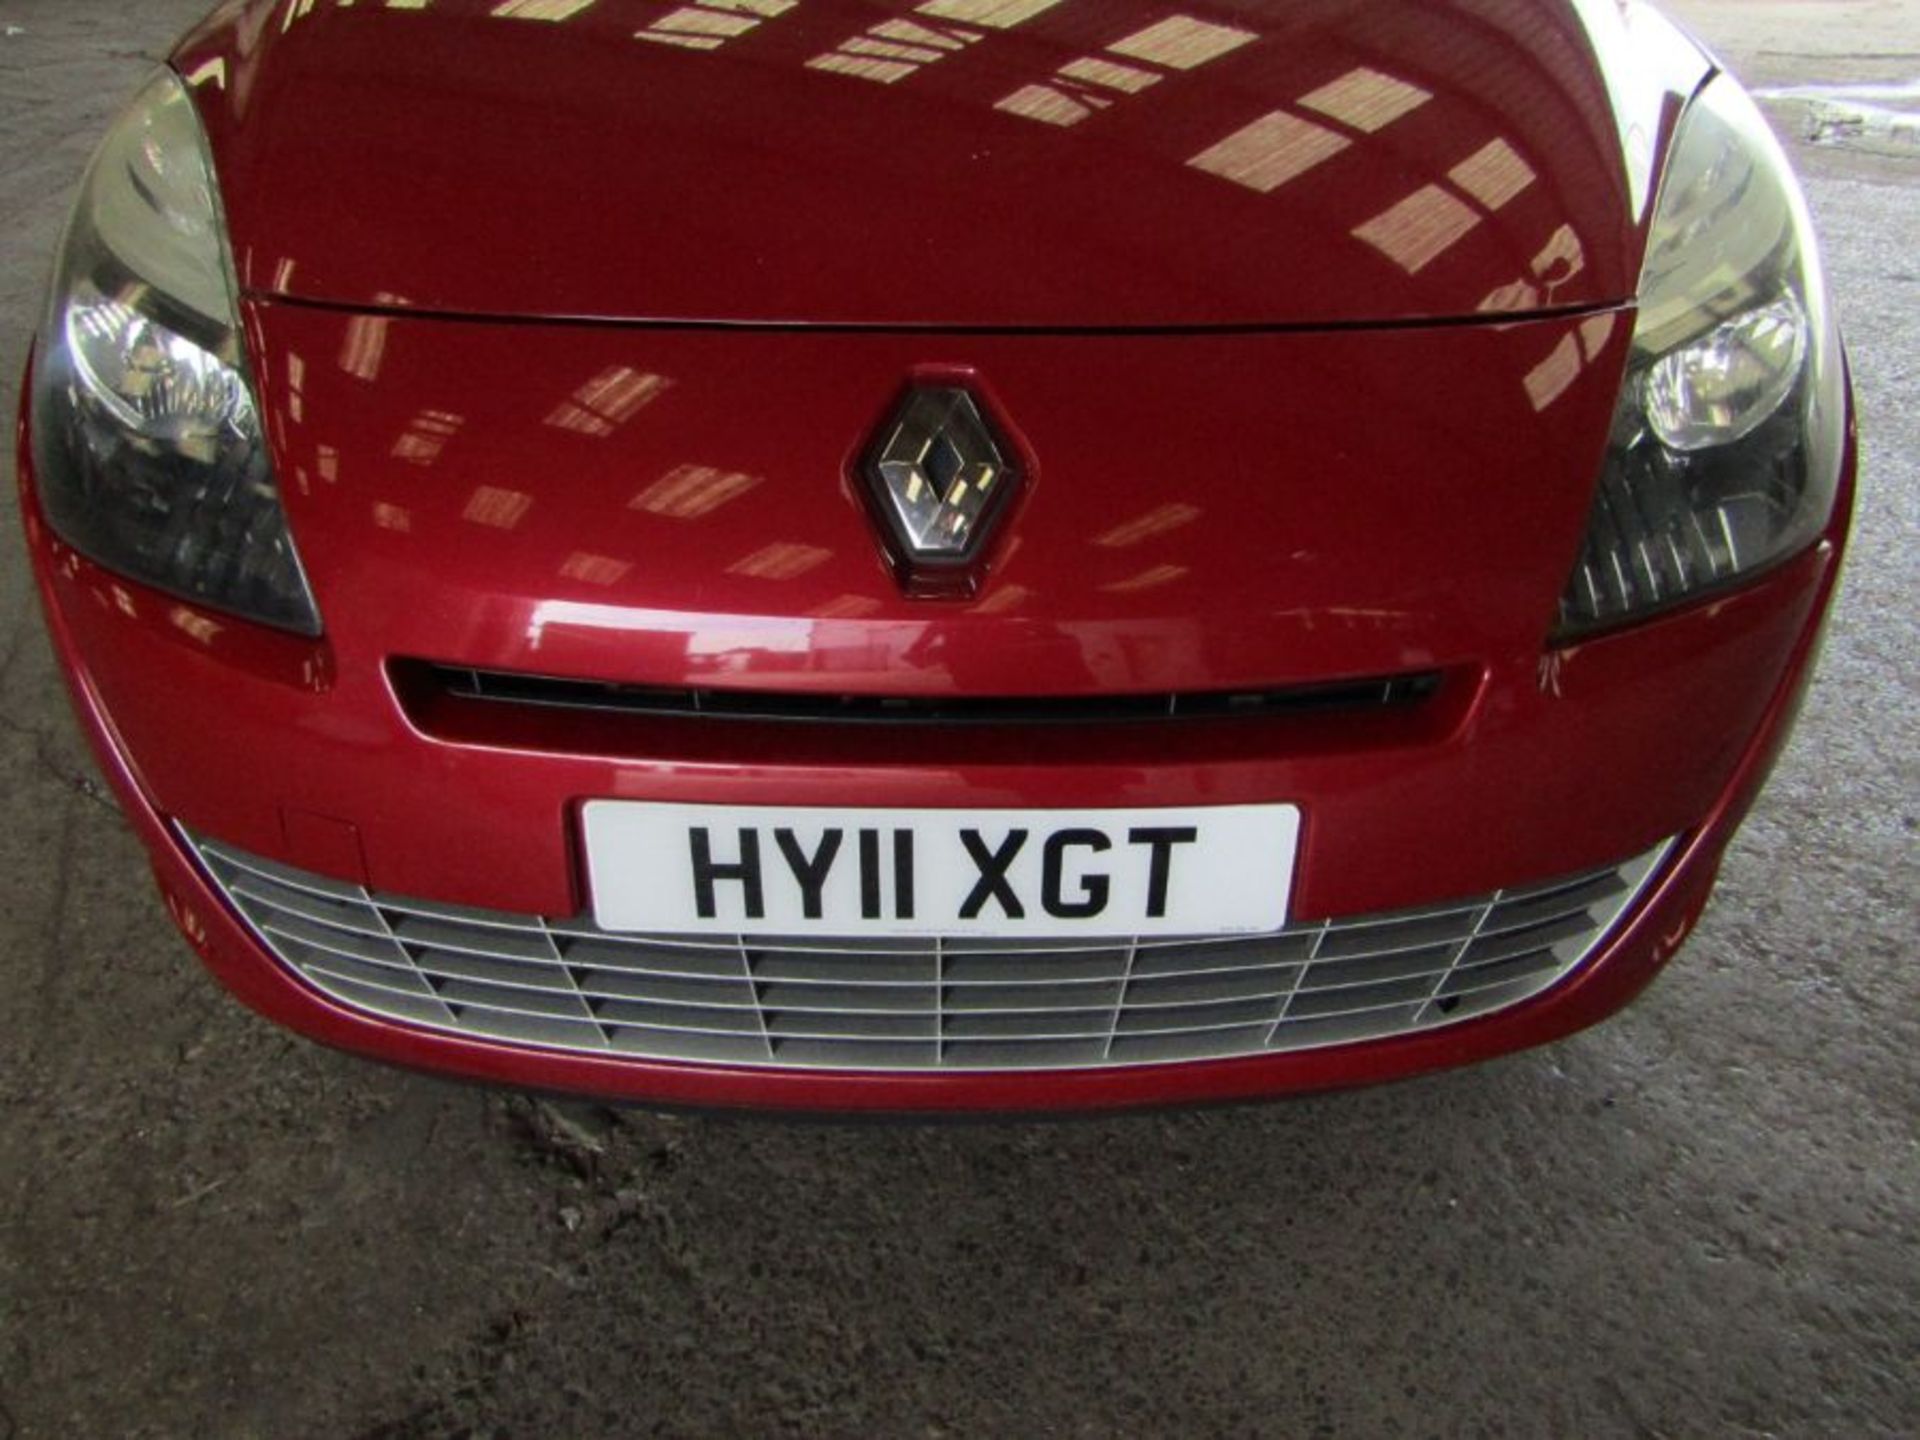 11 Plate Renault Grand Scenic 1.6 VVTi Dynamique Tom Tom 7 seats, CAT N (recorded as such 12/02/ - Image 8 of 42